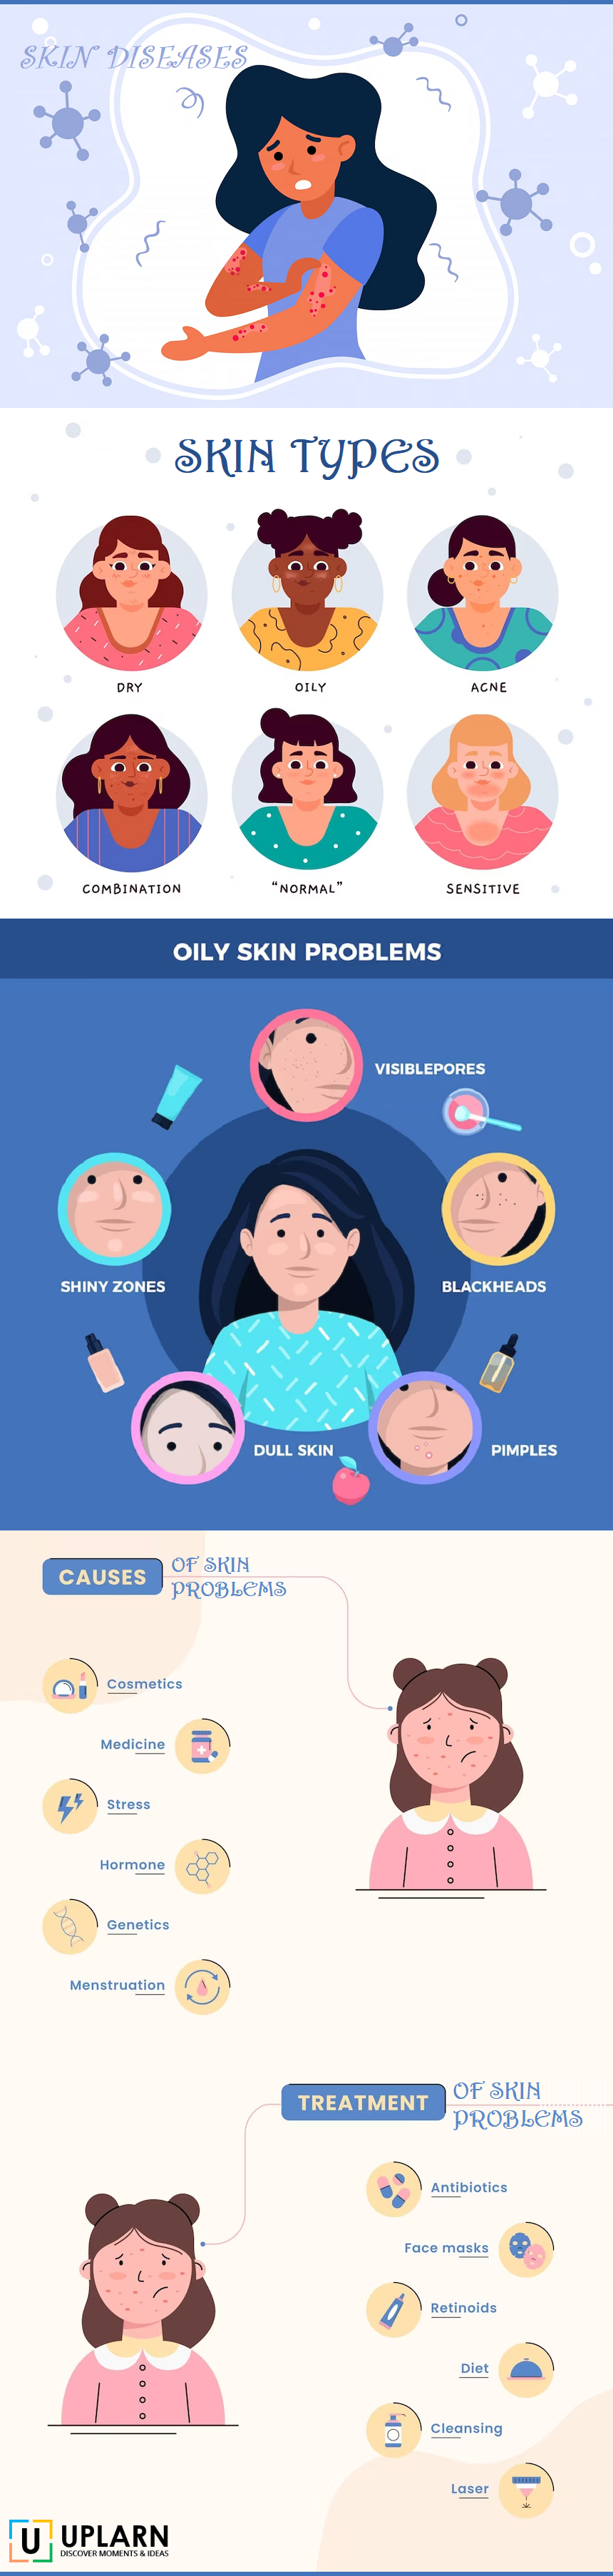 skin diseases infographic